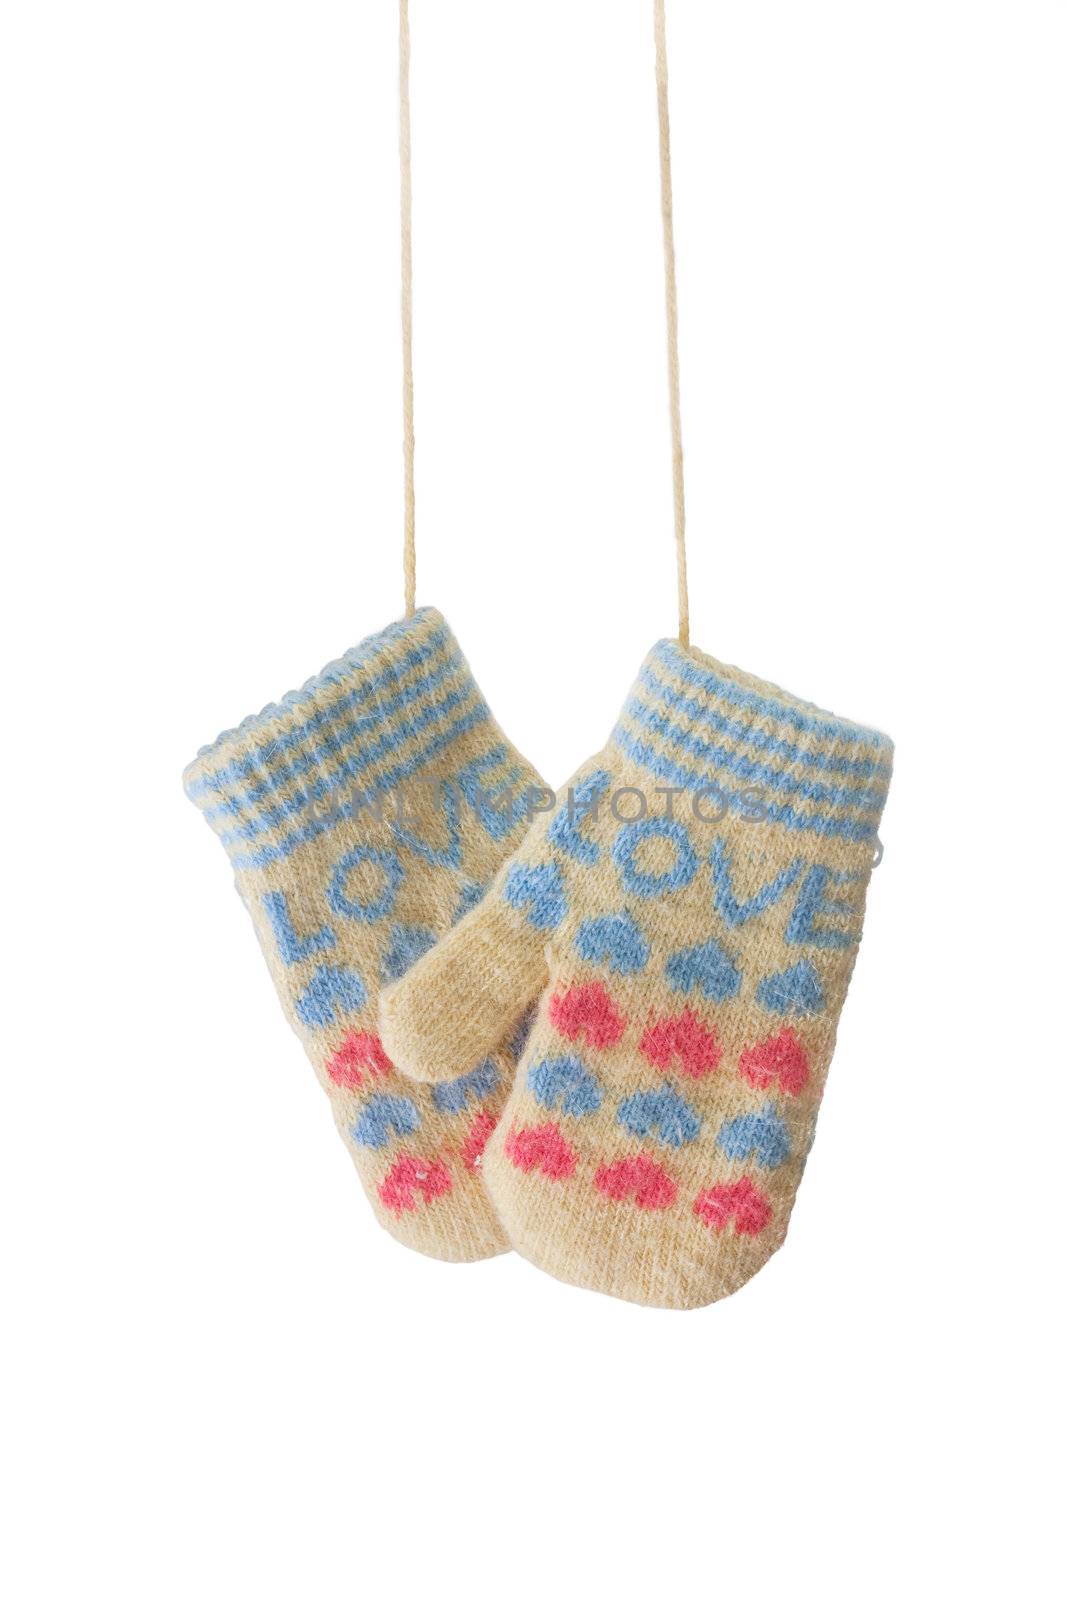 Hanging baby mittens isolated on white background